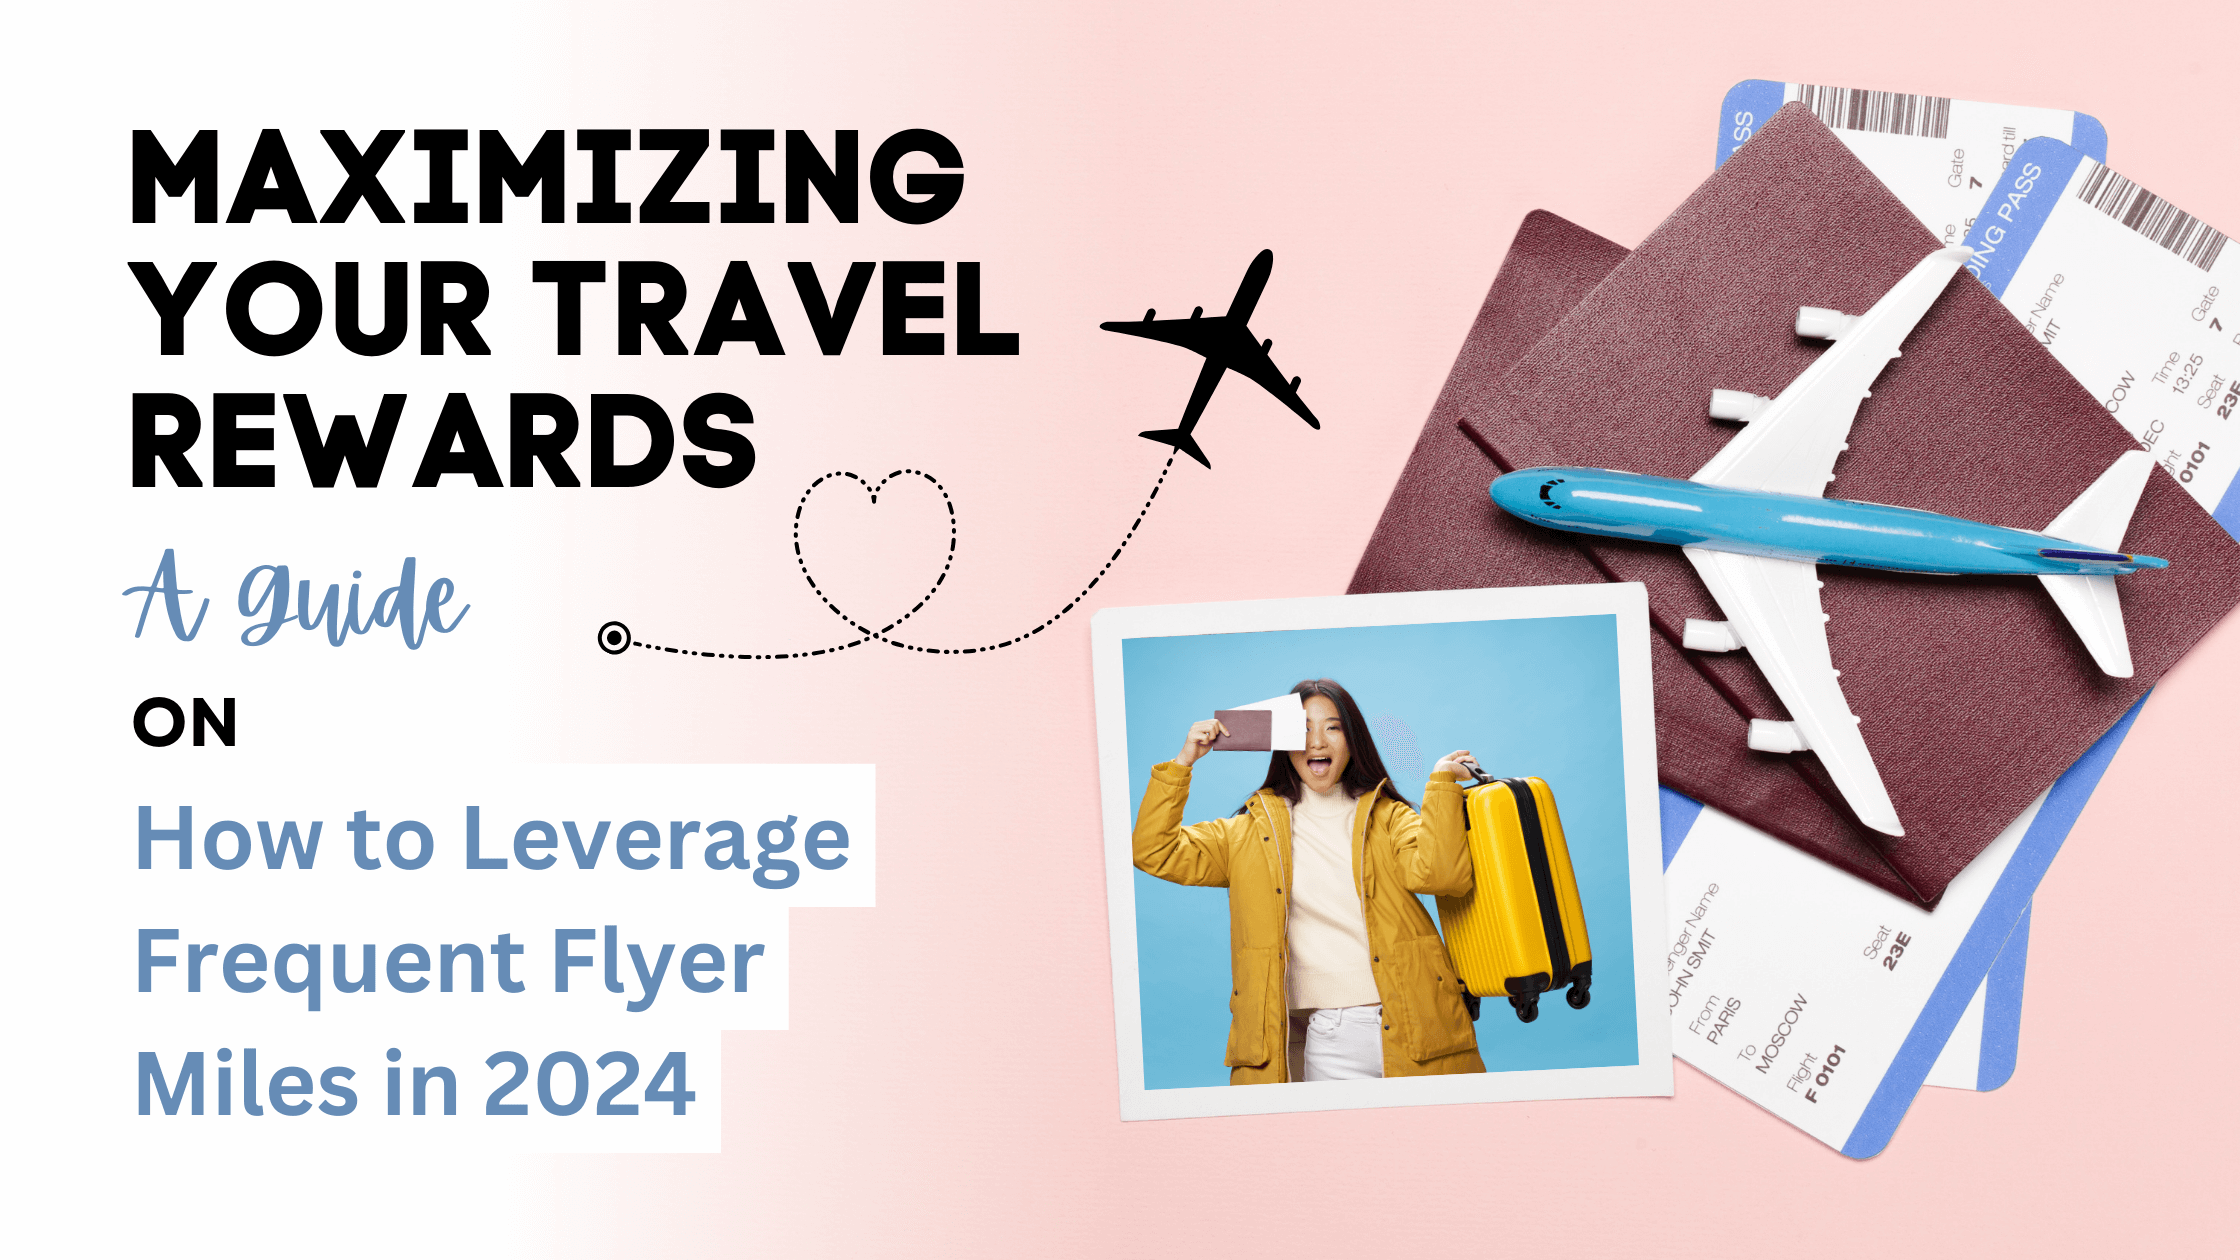 Maximizing Your Travel Rewards: A Guide on How to Leverage Frequent Flyer Miles in 2024